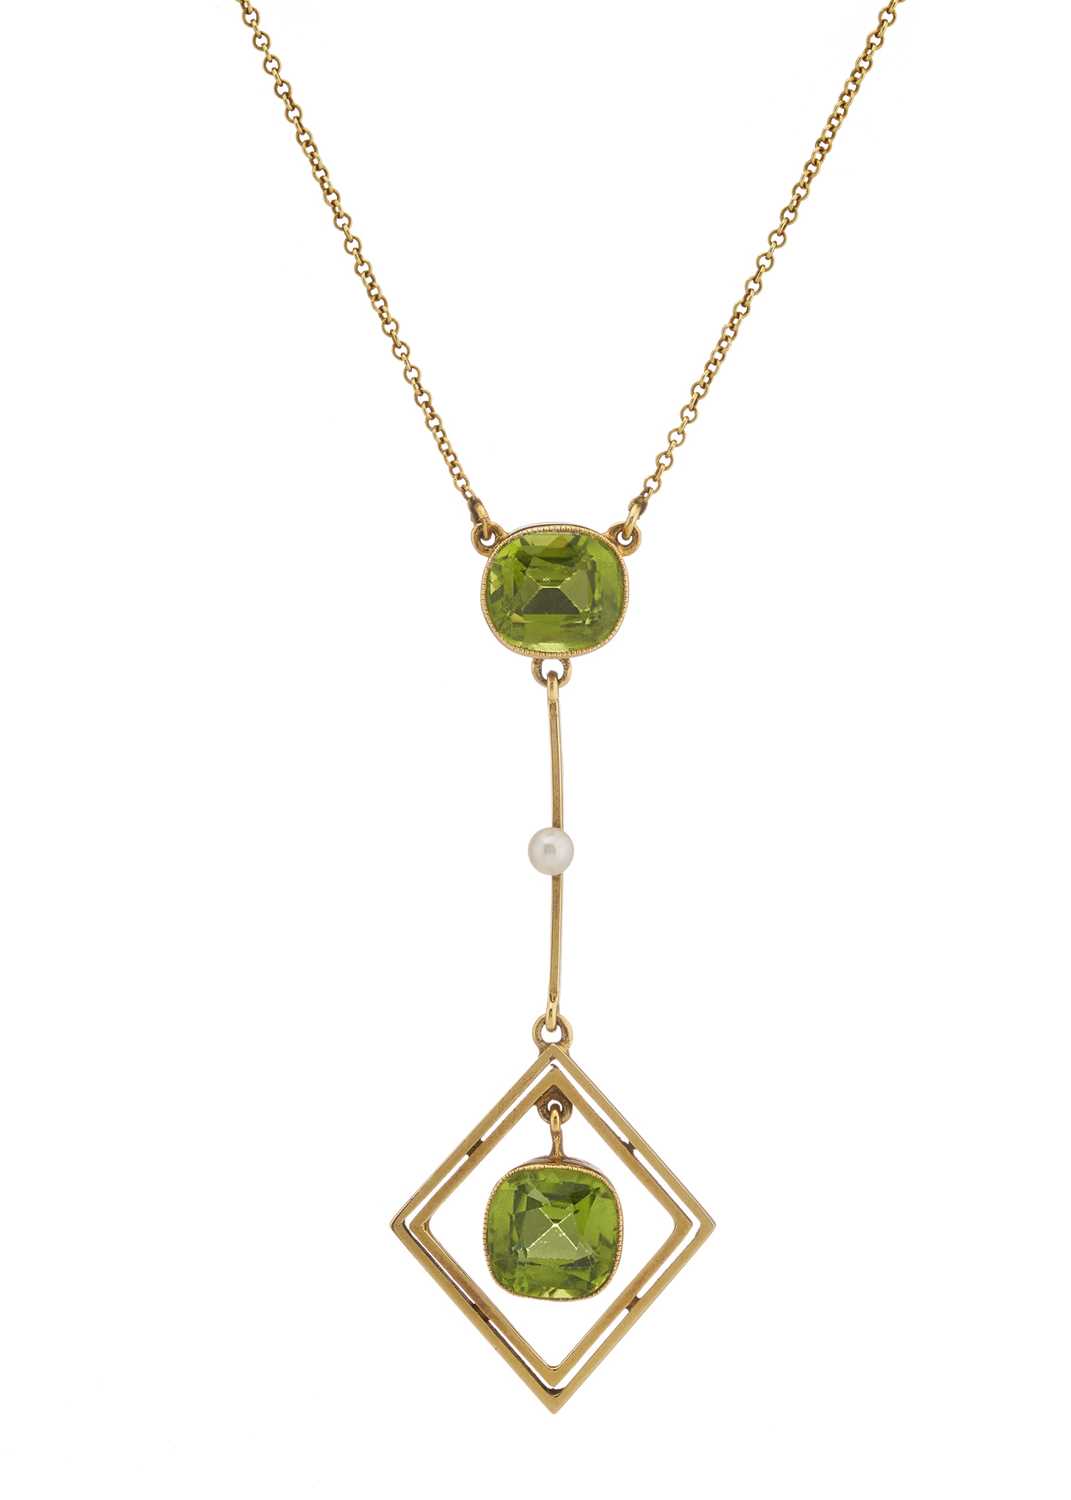 Lot 3 - An Edwardian 15ct gold peridot and pearl pendant, with chain